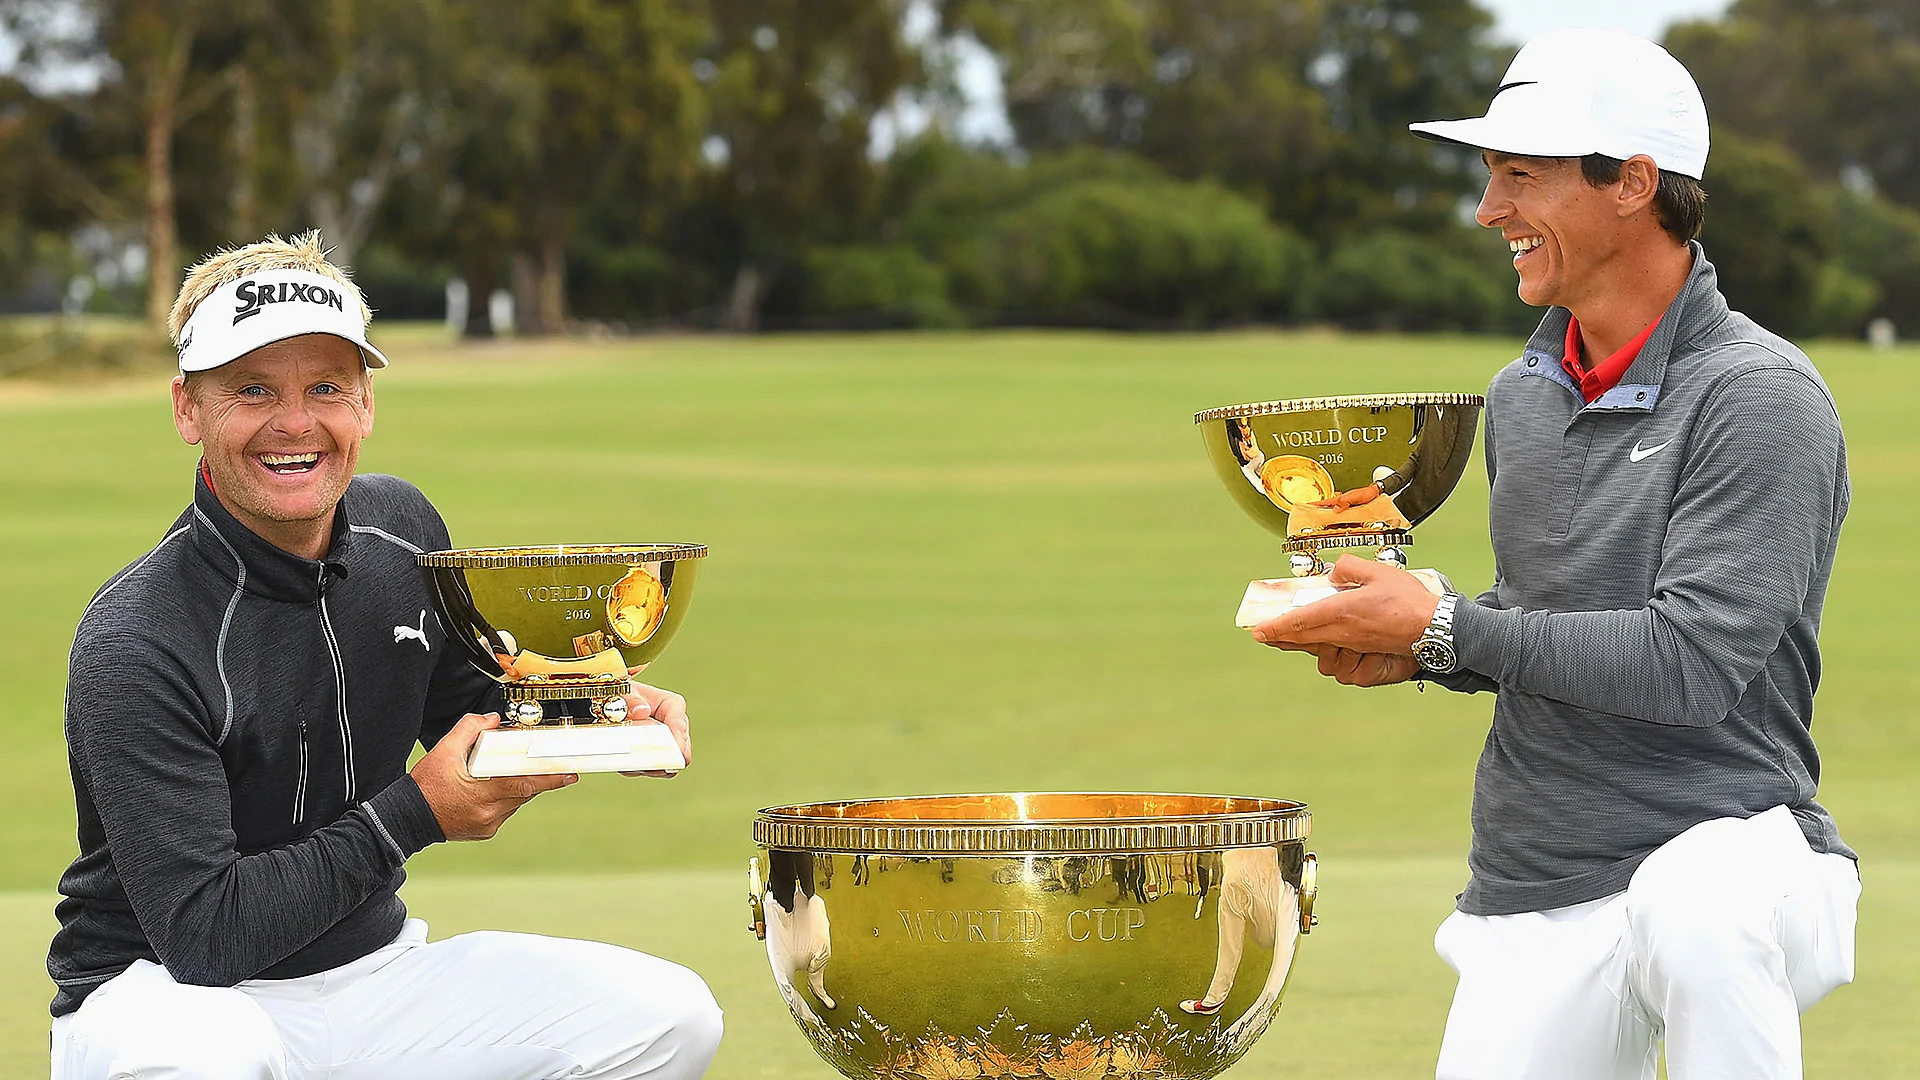 World Cup of Golf returning to Australia in 2018